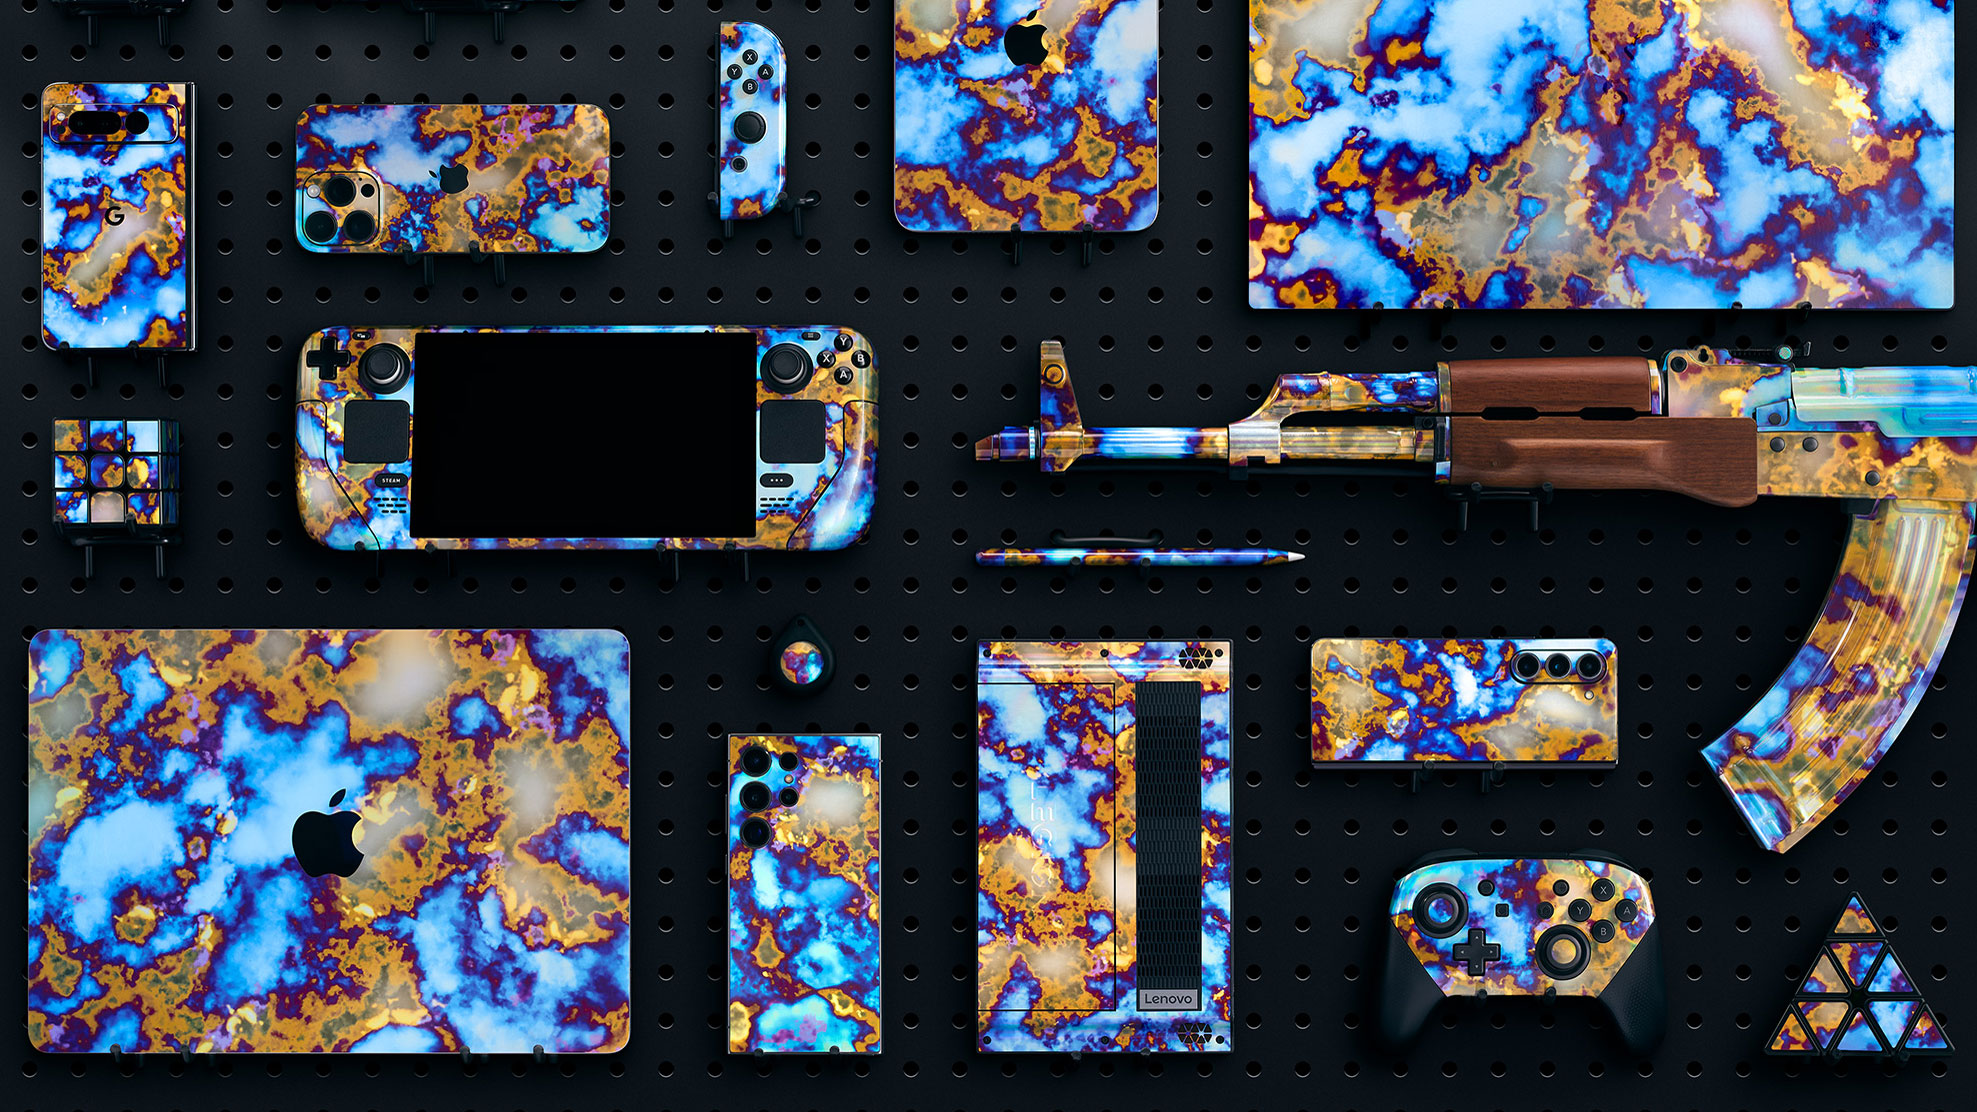 A look at dbrand's new Case Hardened skins, inspired by Counter-Strike